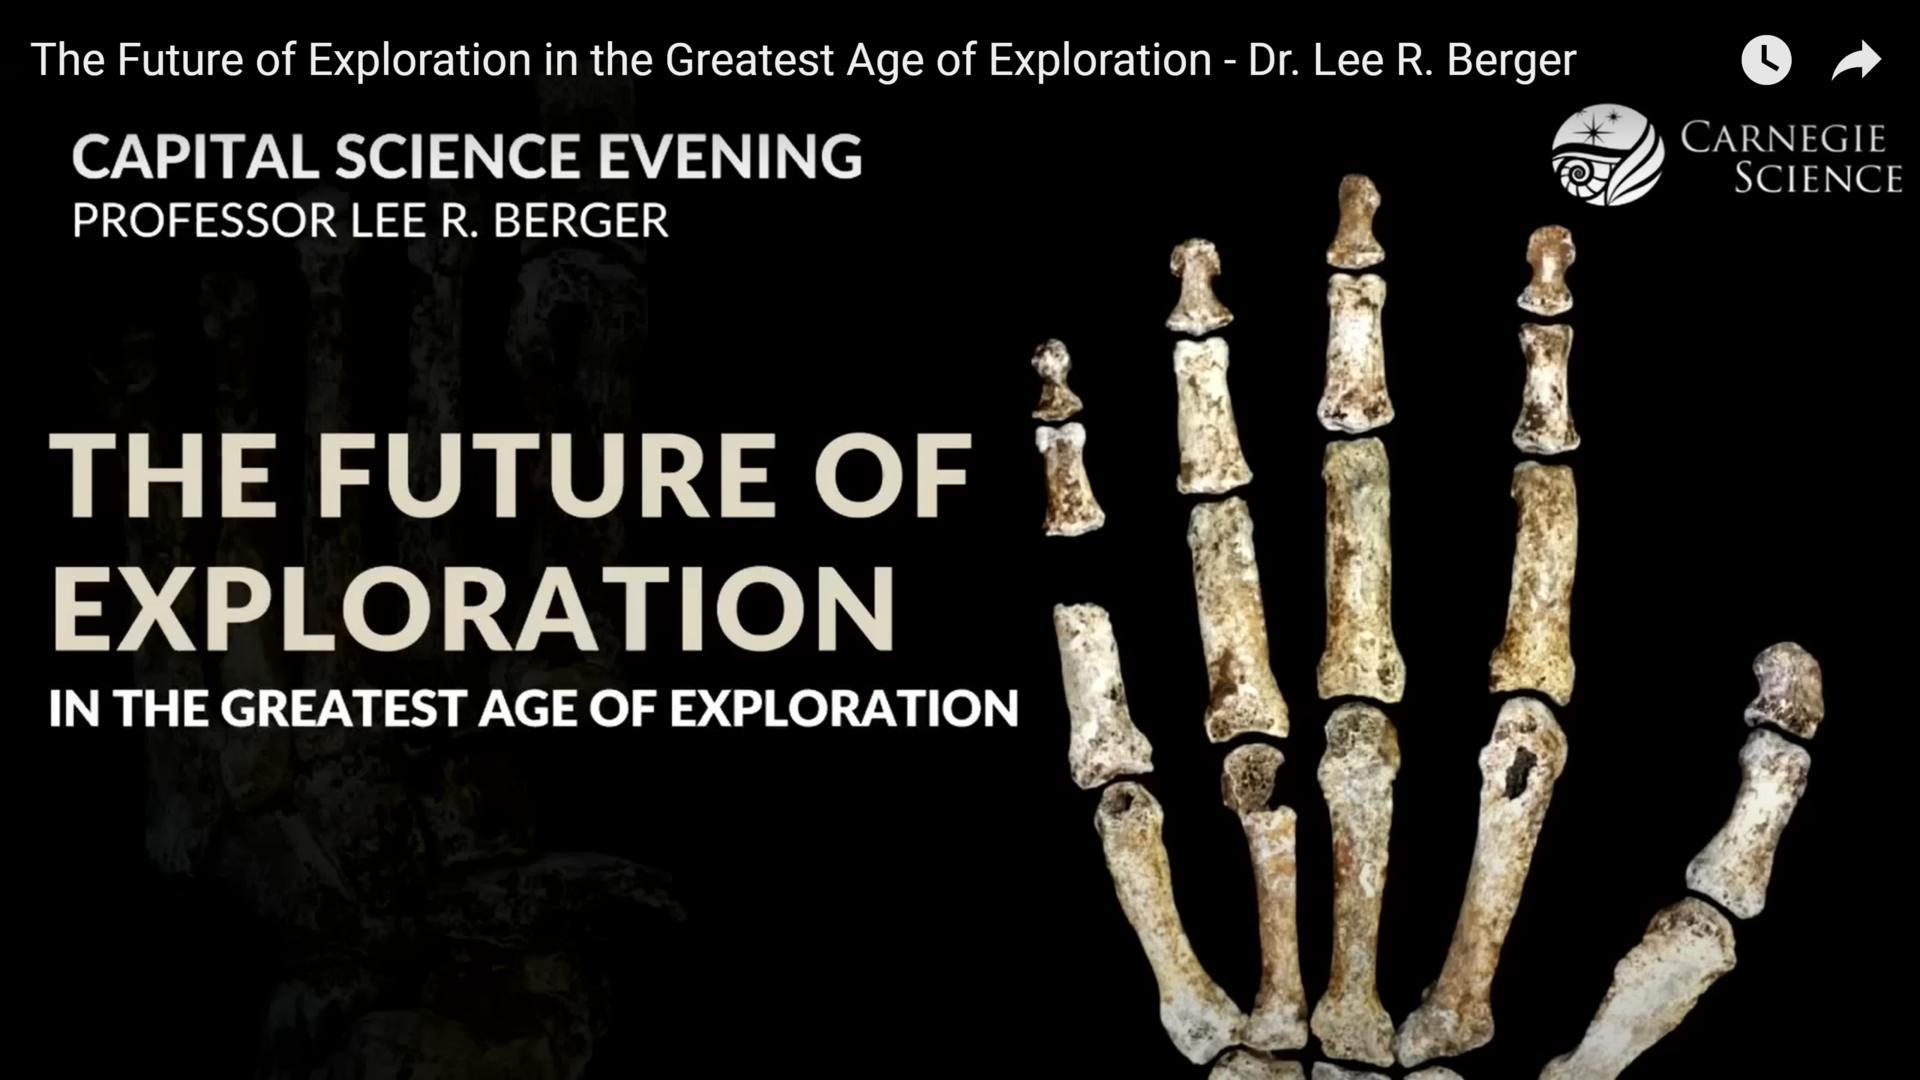 5.3 Carnegie Science - The Future of Exploration in the Greatest Age of Exploration by Prof. Lee Berger